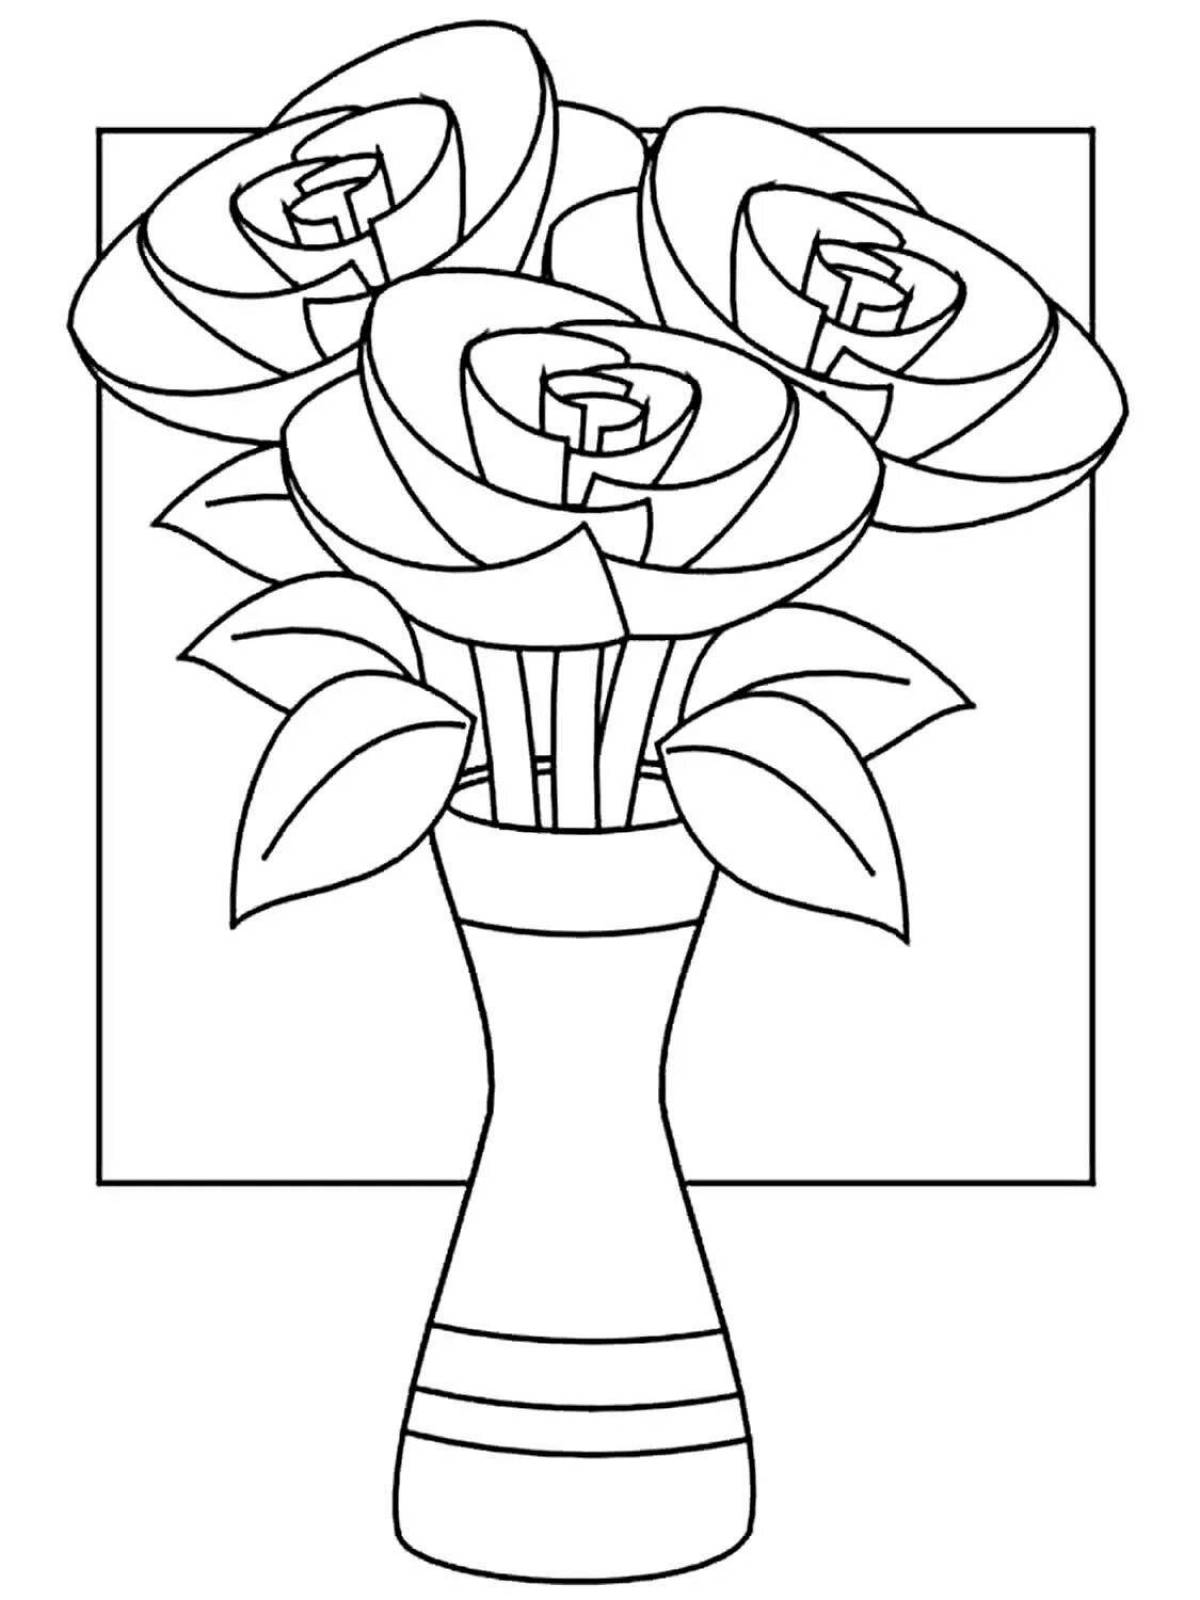 Great flowers in a vase coloring book for kids 6-7 years old